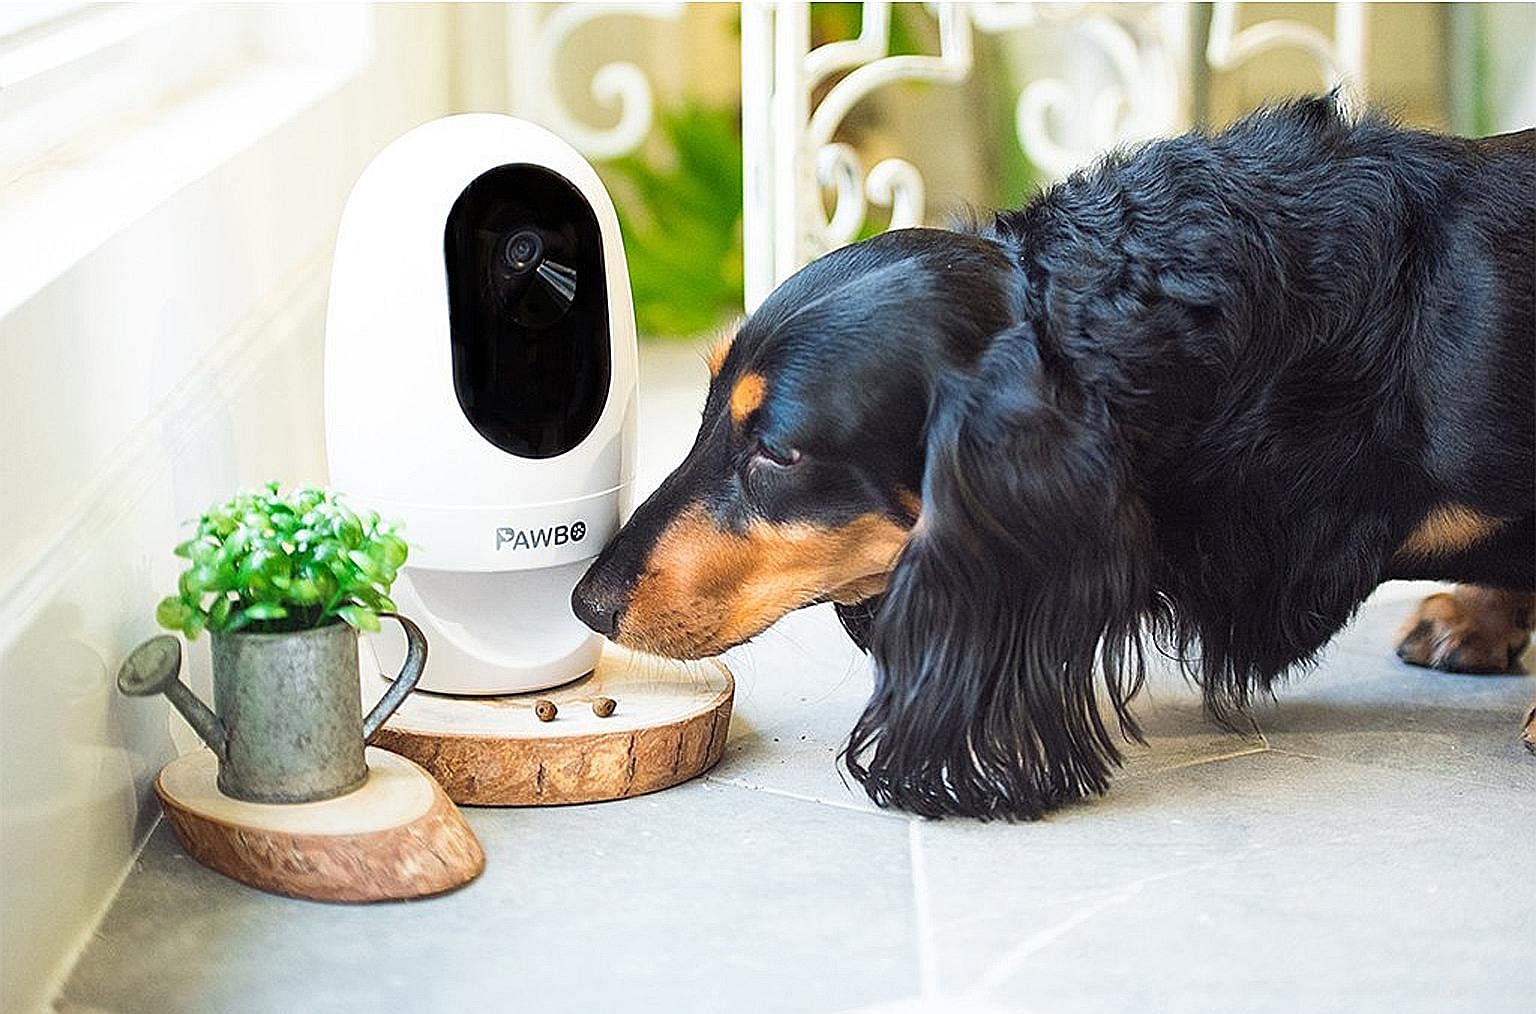 If you see that your pet has been a good boy, tap a button on your smartphone and the Pawbo+ smart pet camera will dispense a reward.